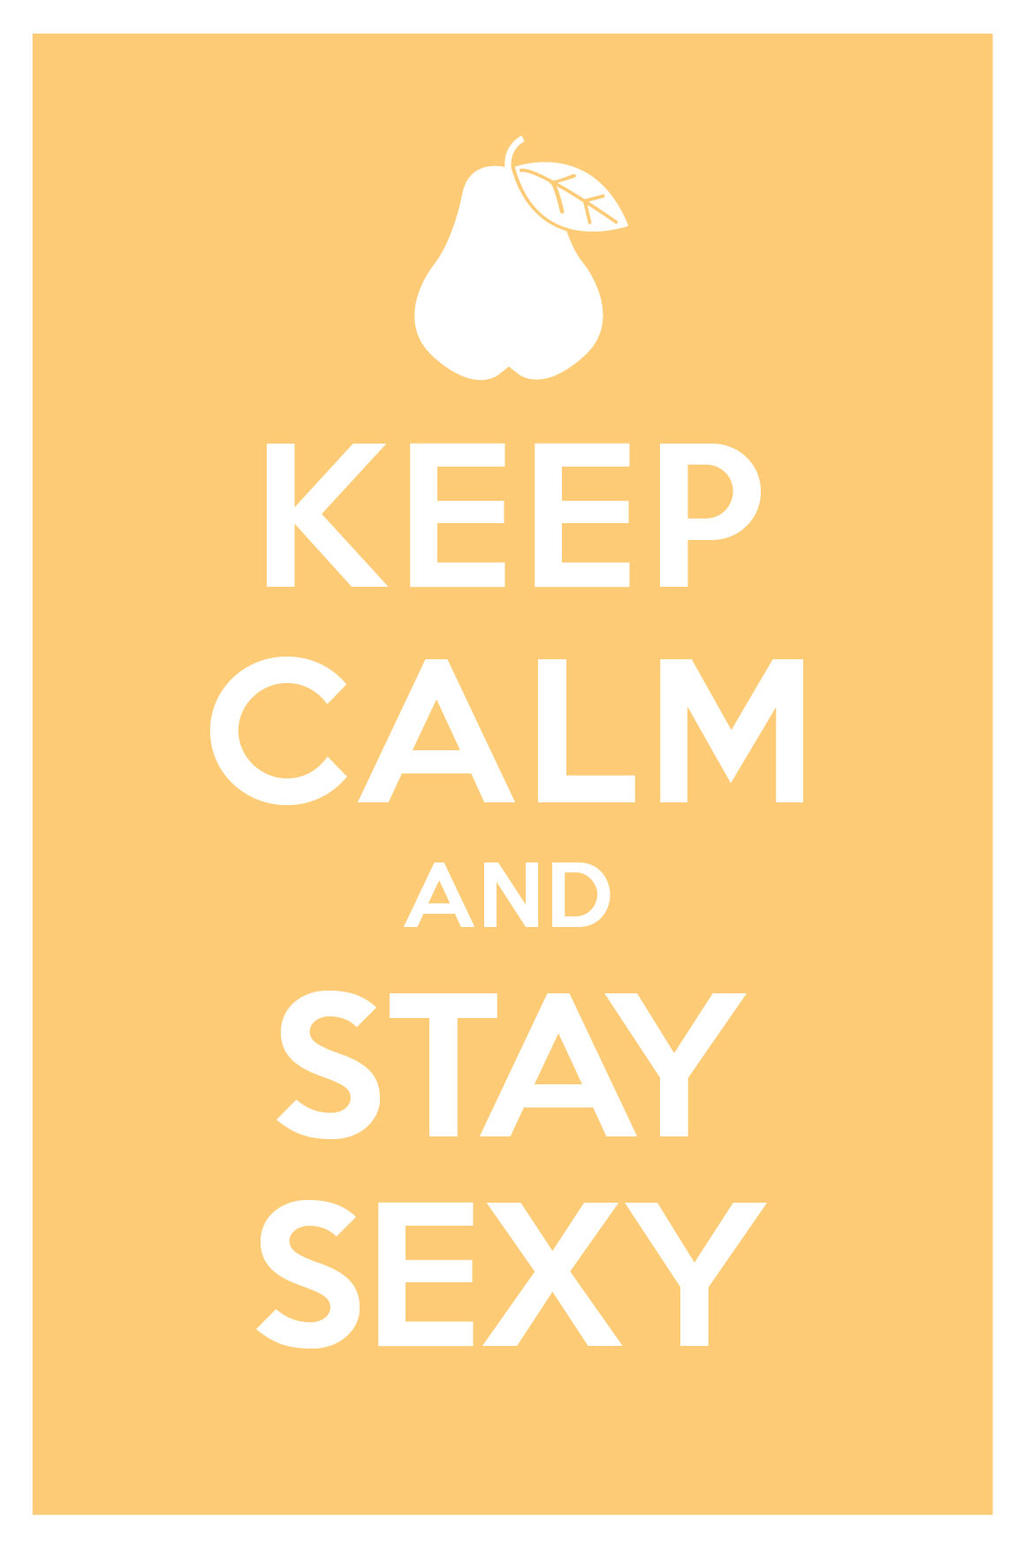 KEEP CALM AND STAY SEXY